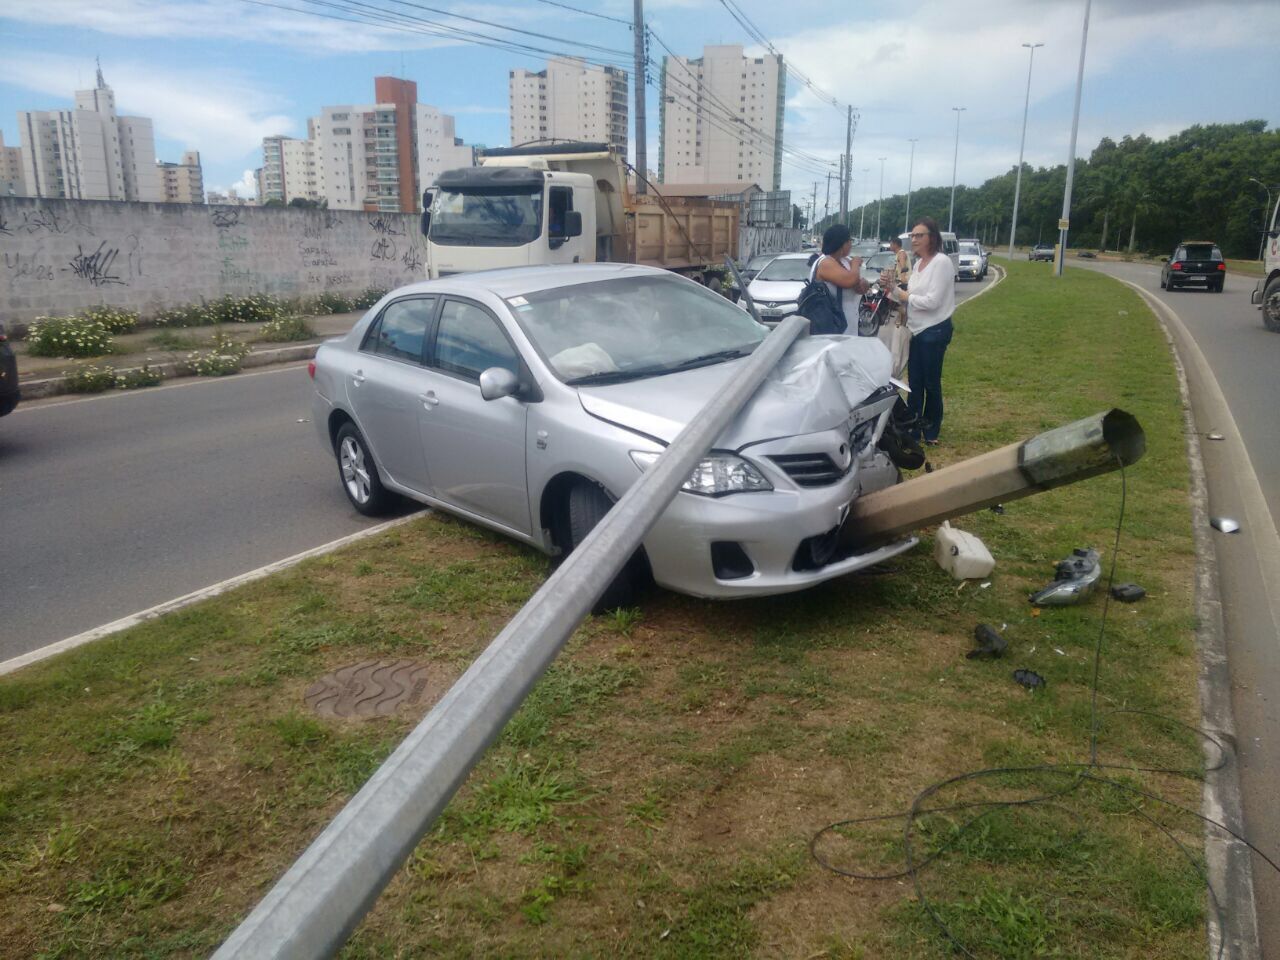 I've seen a lot on this life, but never a smoking Corolla using a selfie stick